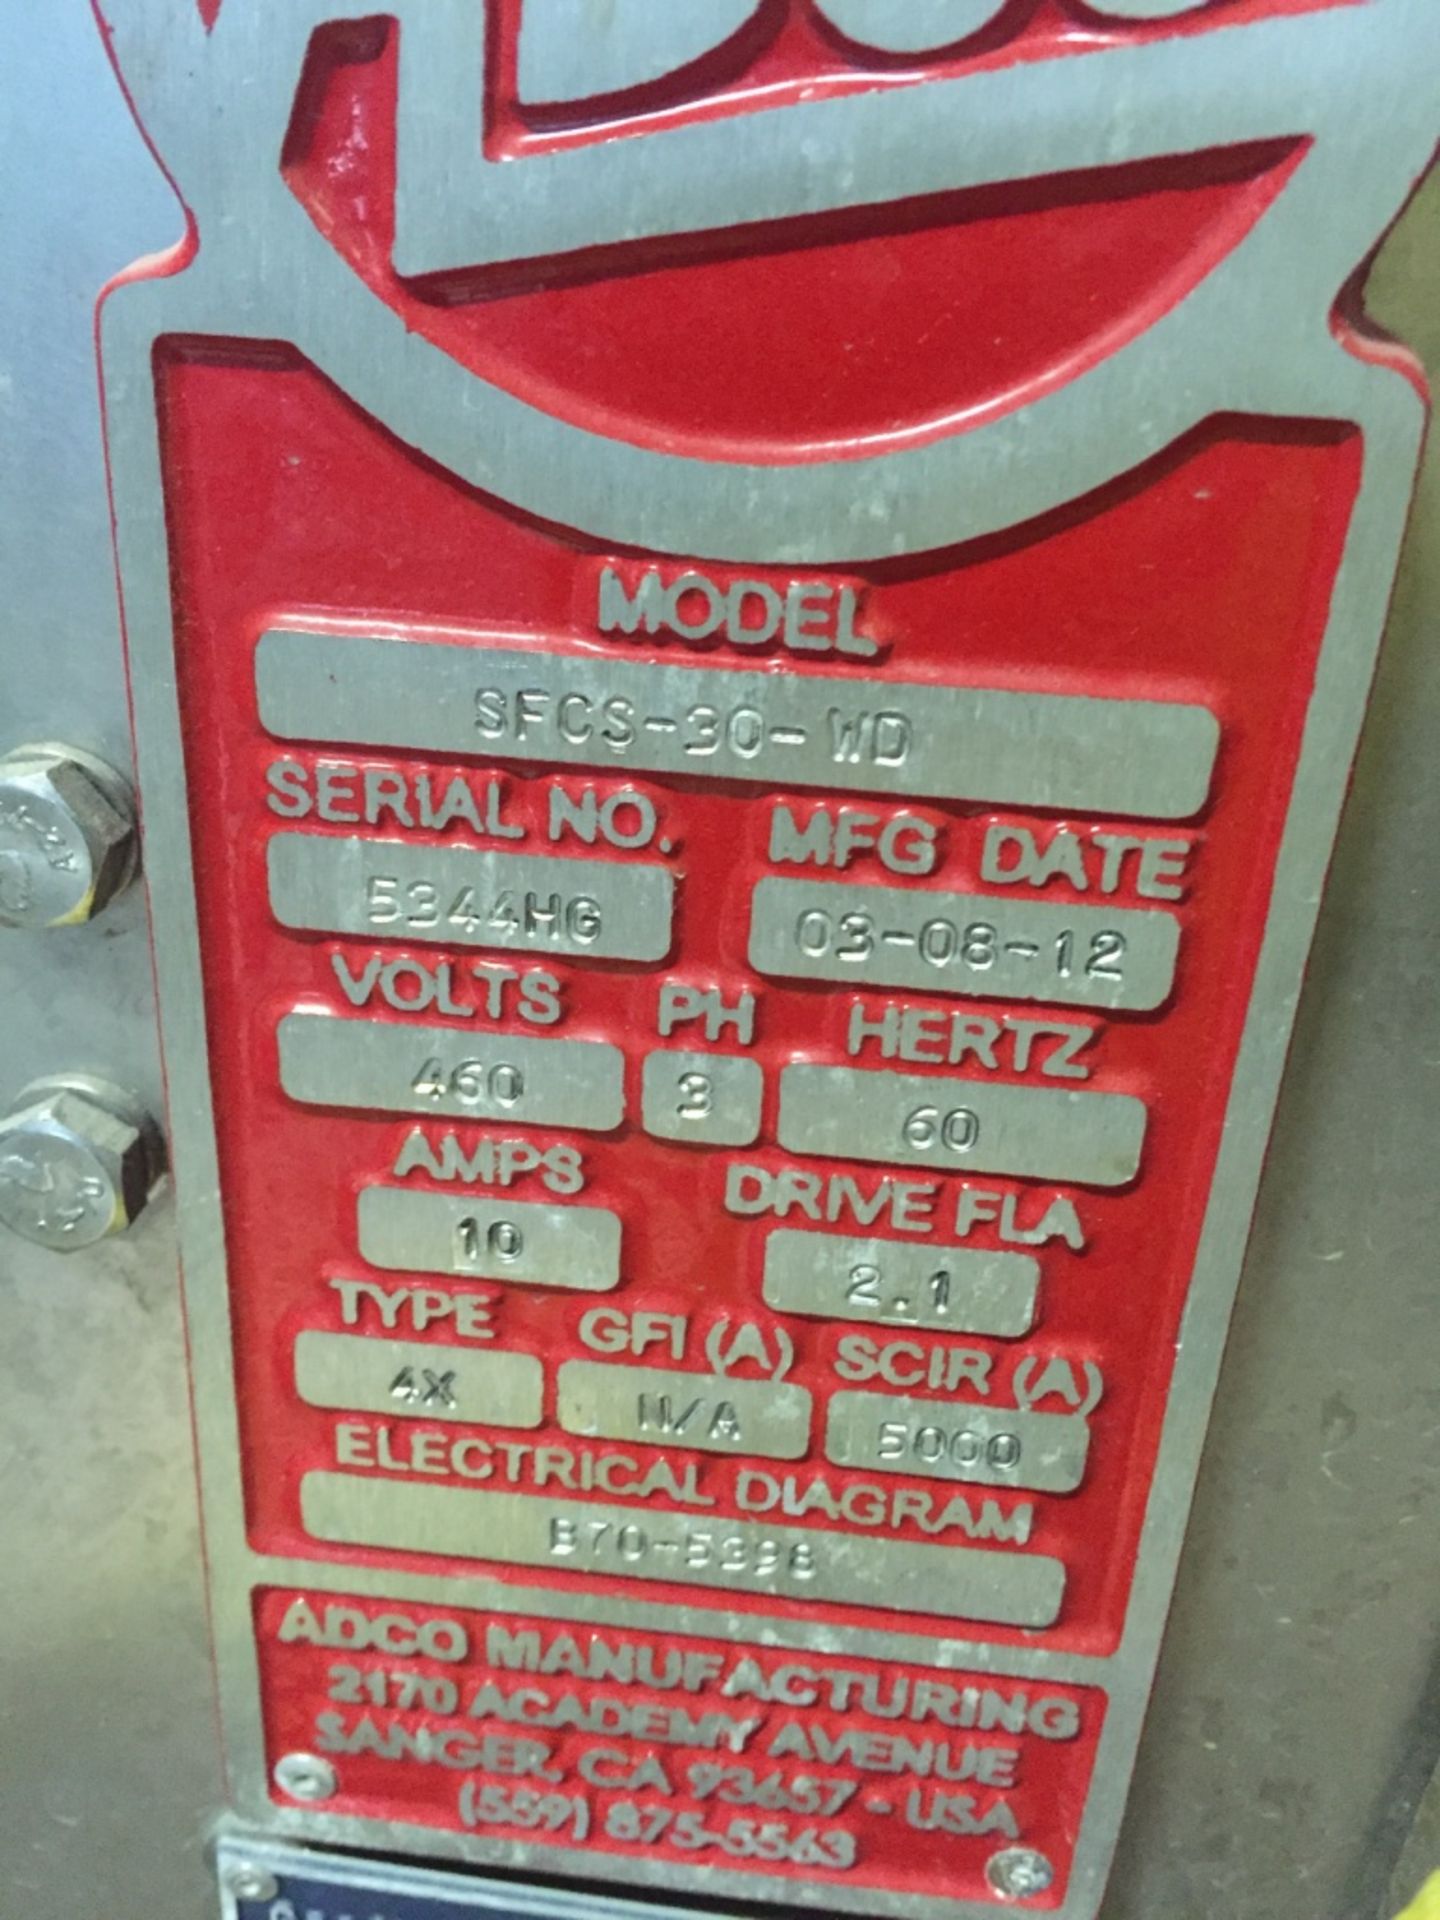 (Located In Madison WI) ADCO Cartoner Model SFCS-30-WD S/N 5344HG - Image 2 of 5